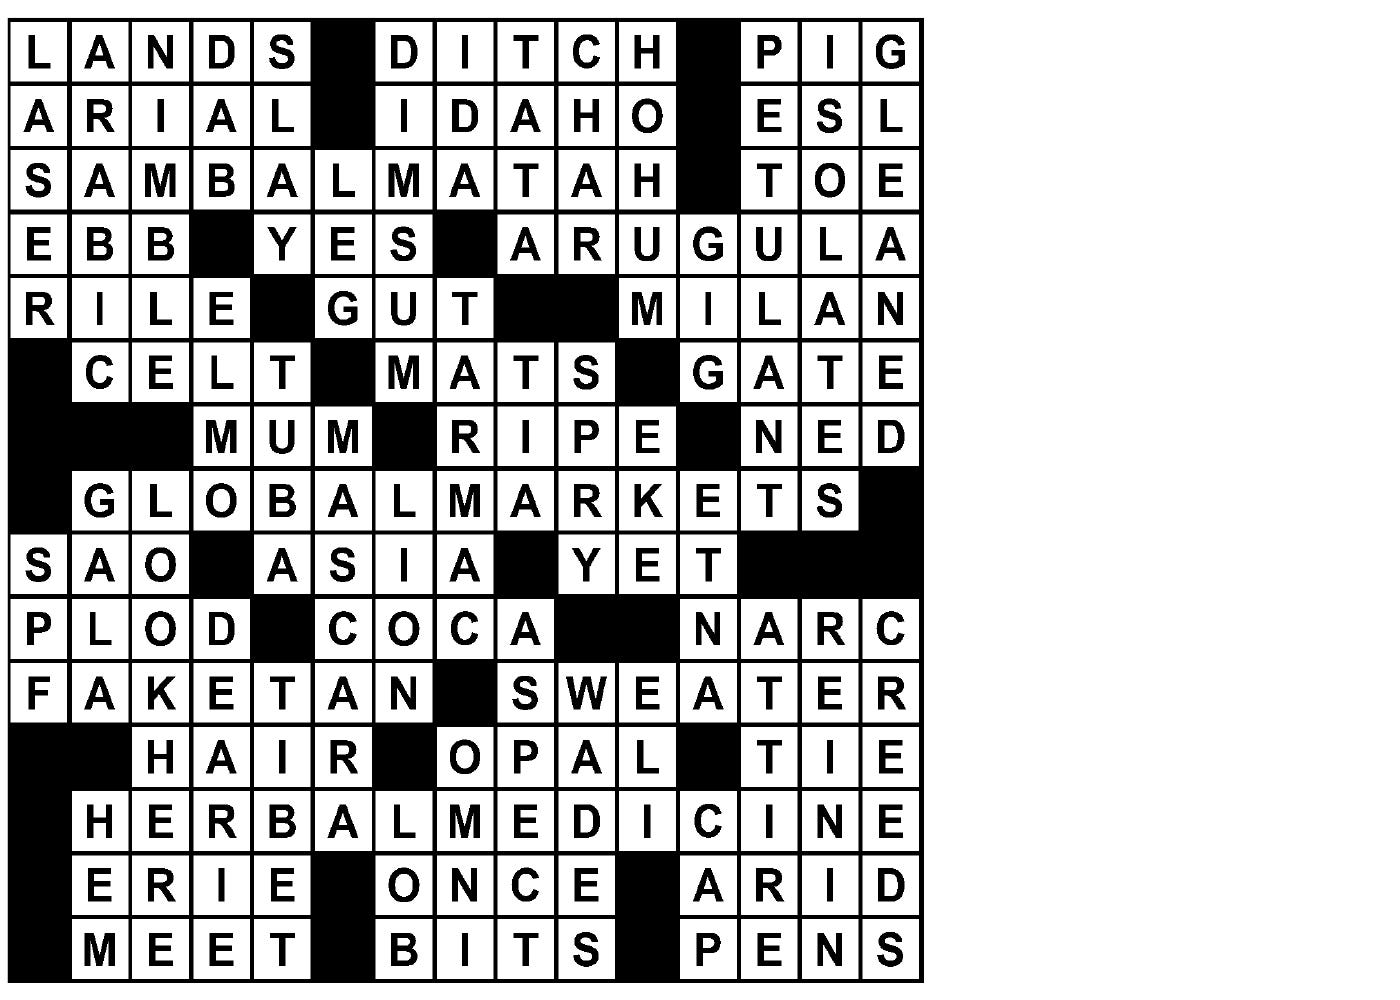 usa today network newspaper crossword sudoku puzzle answers today